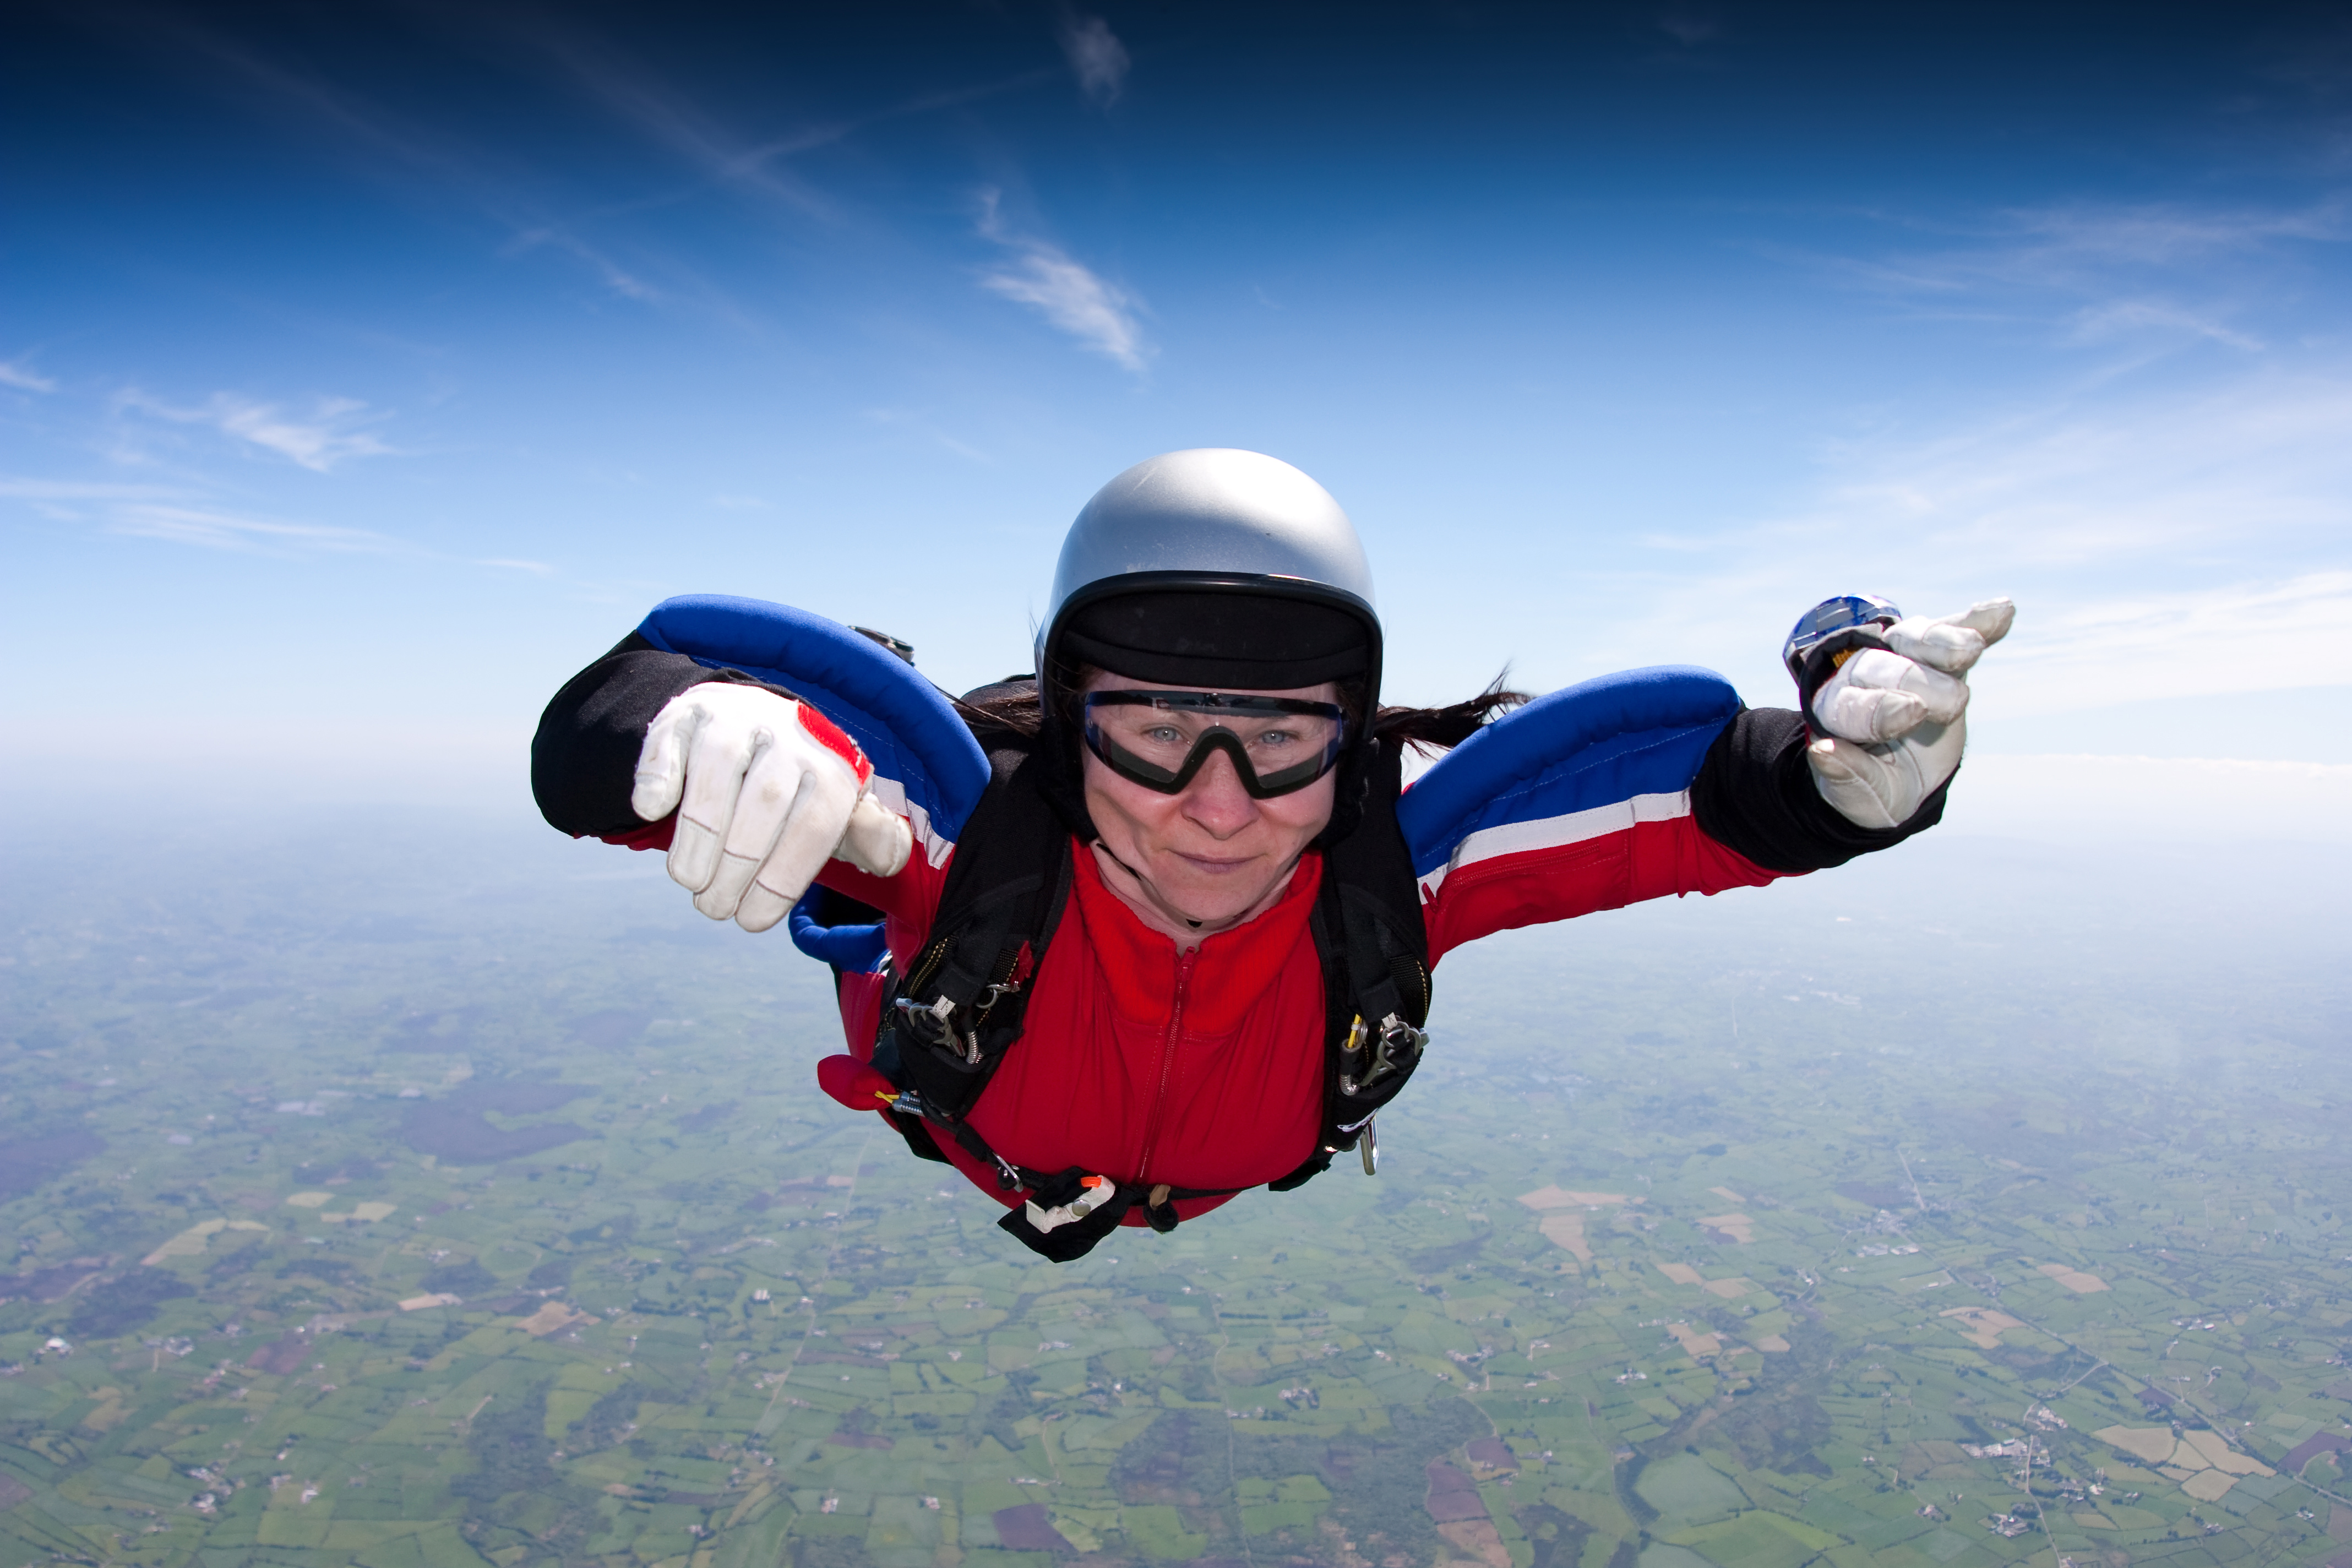 Skydiving photography techniques